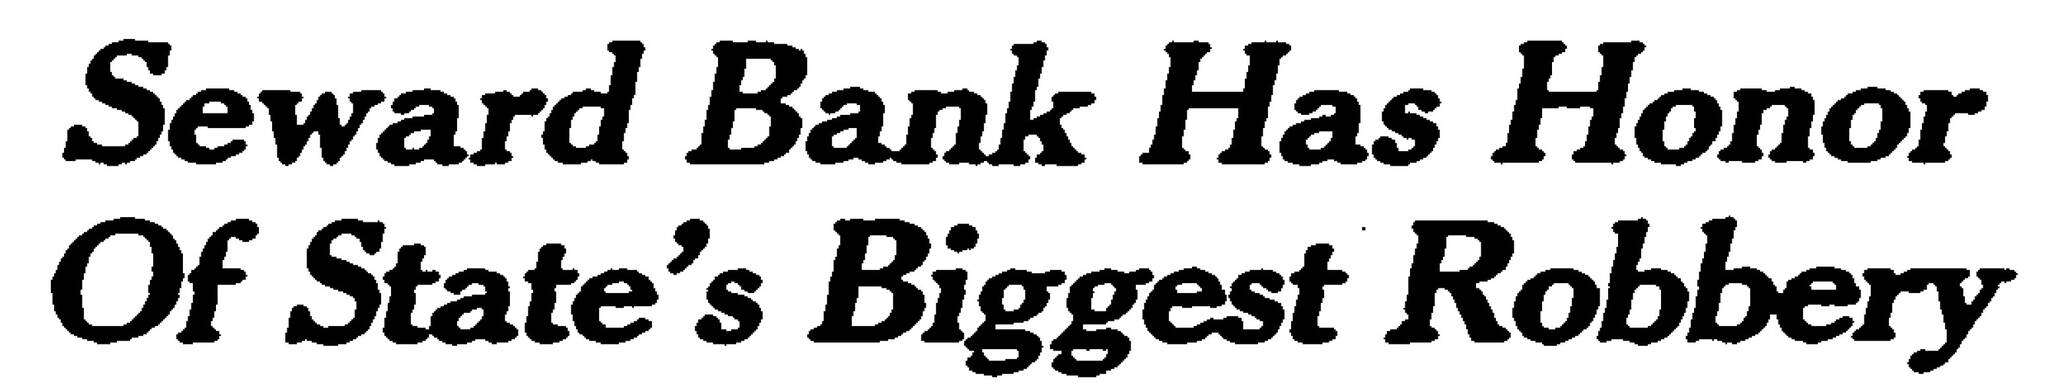 In 1979, the Anchorage Daily Times ran a story indicating that the Seward bank robbery in August 1971 had been the biggest in Alaska history.